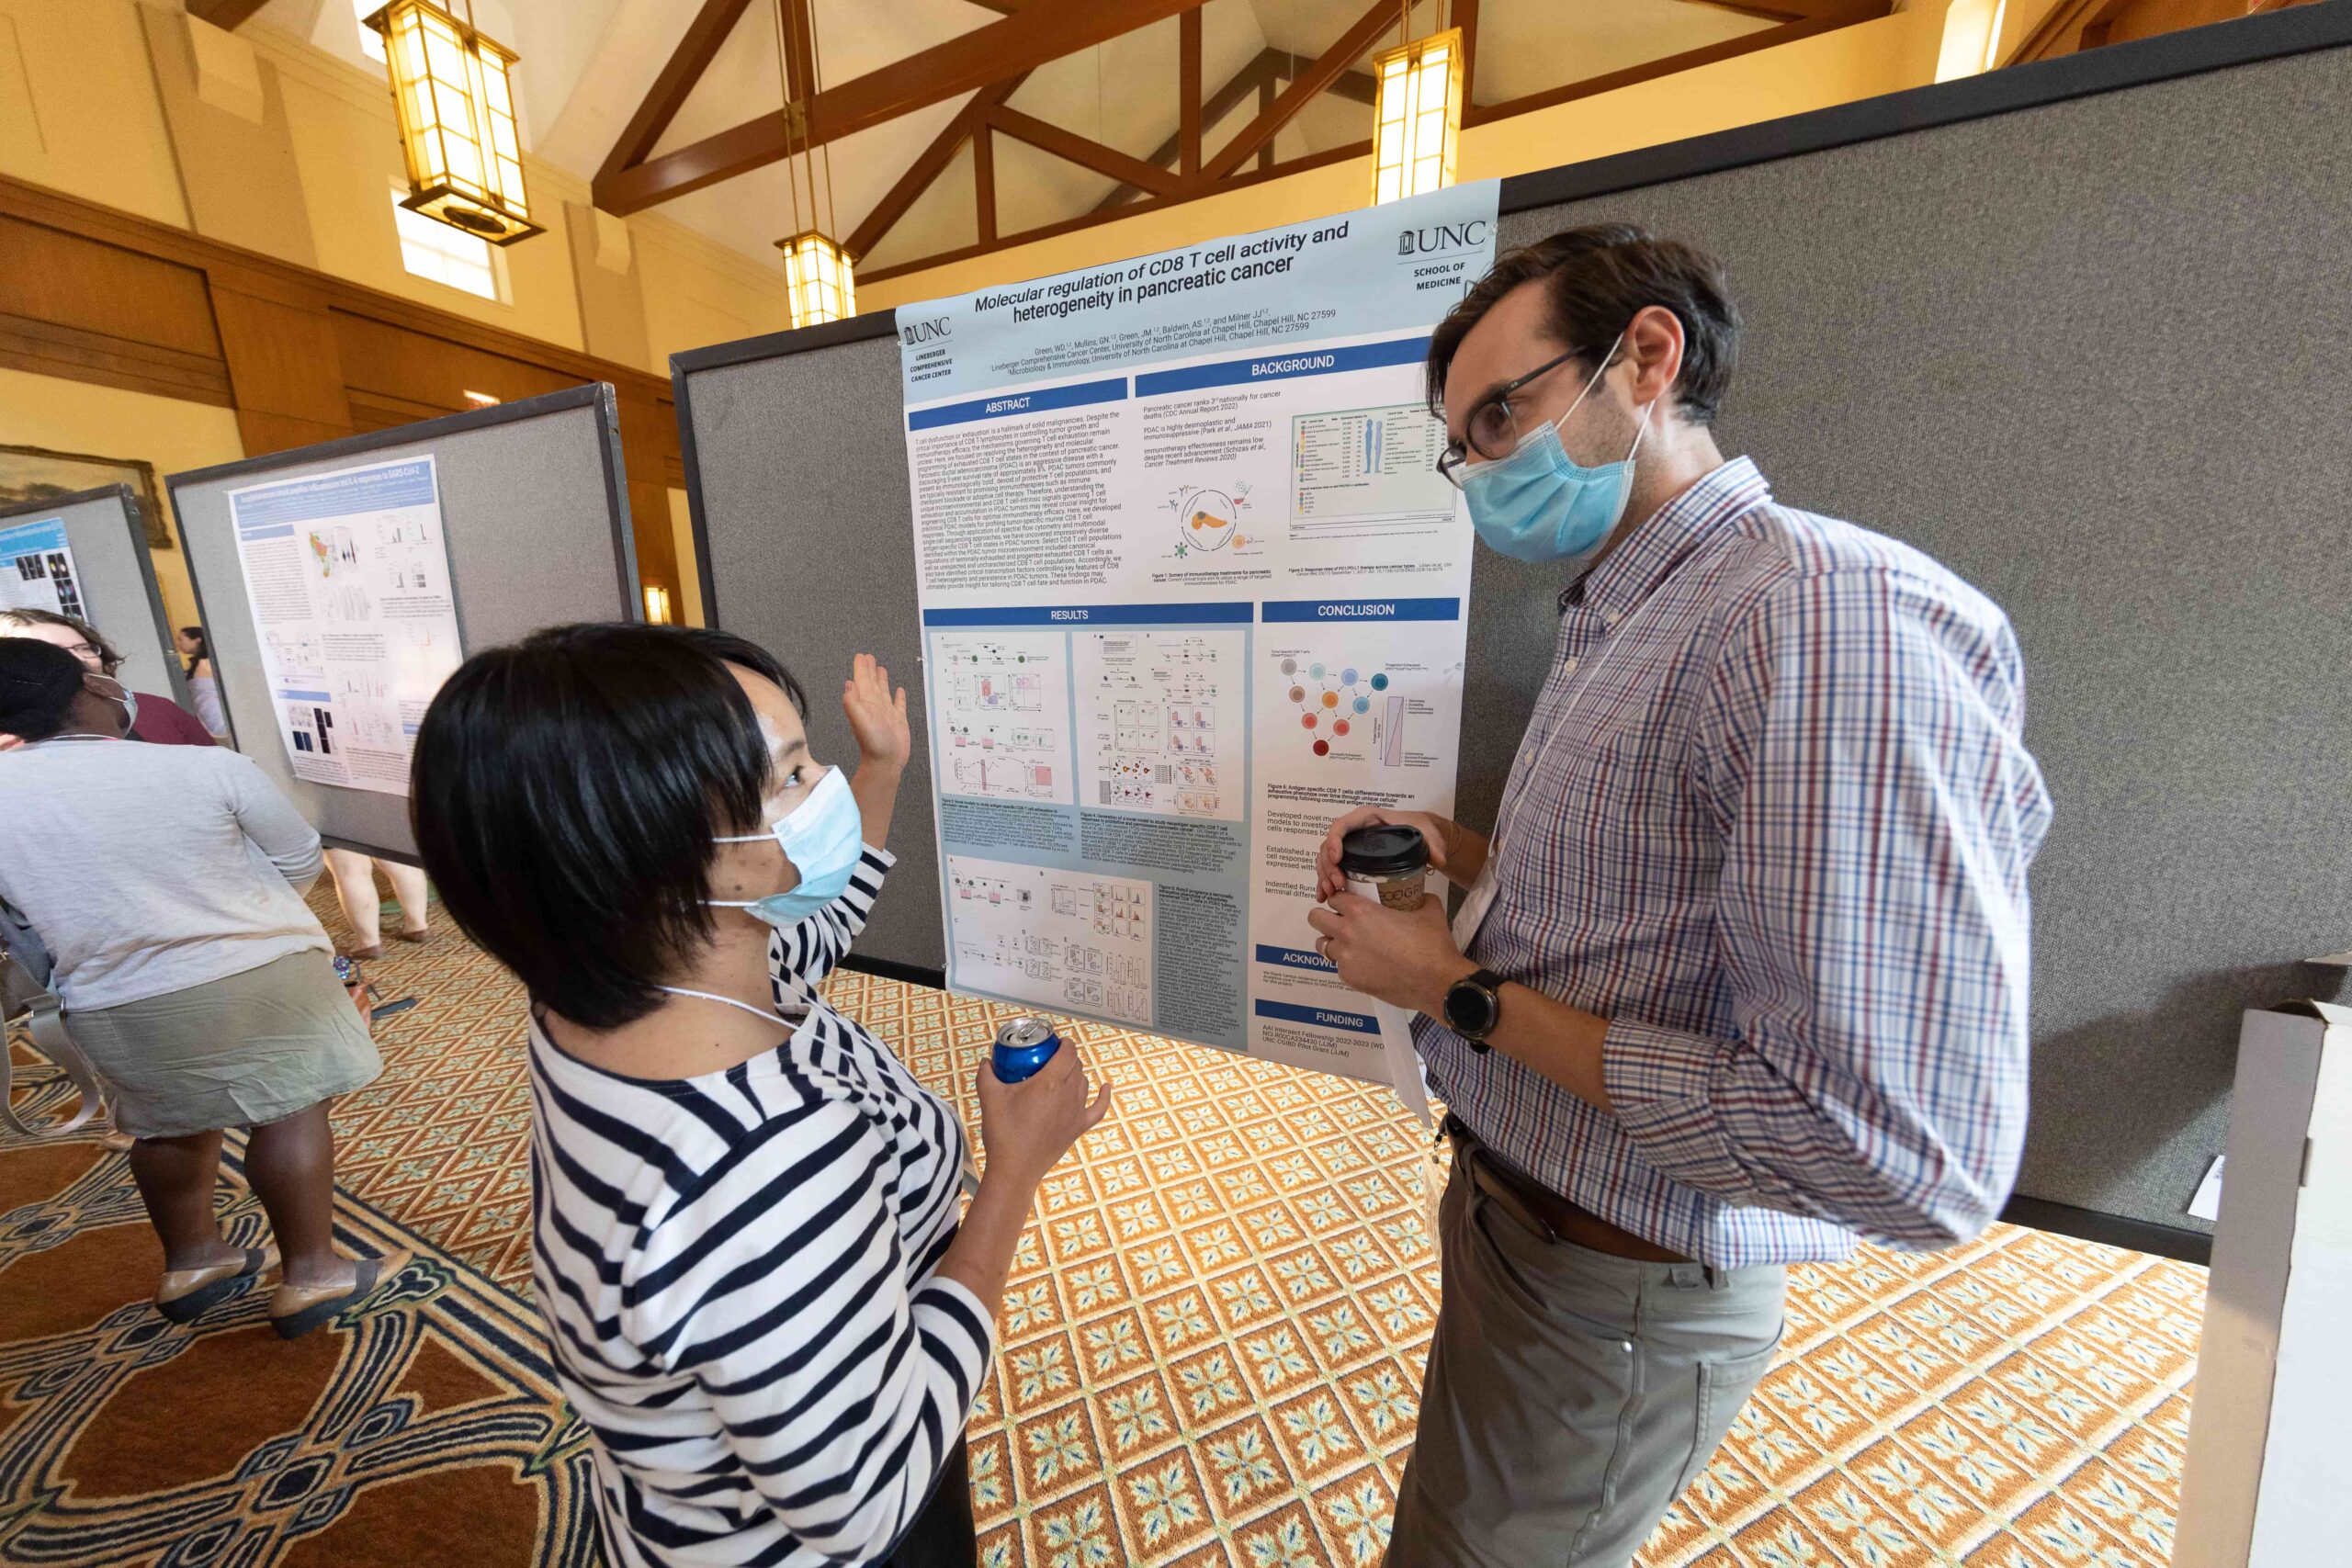 Scientific retreat brings together cancer center community, offers insights across research fields